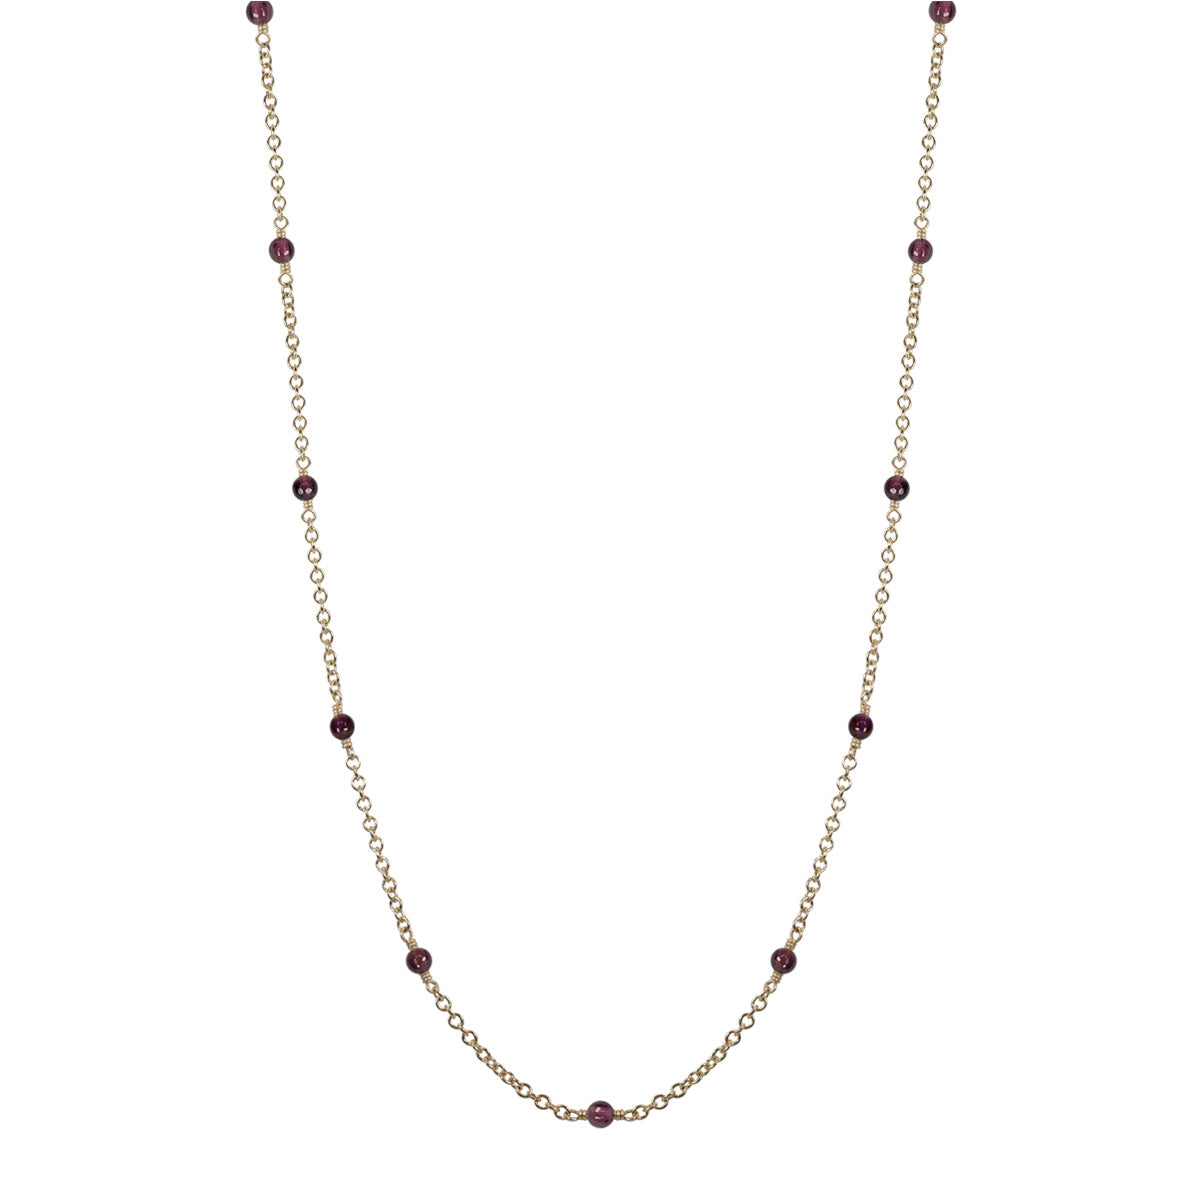 10K Gold Simple Beaded Chain with Garnet